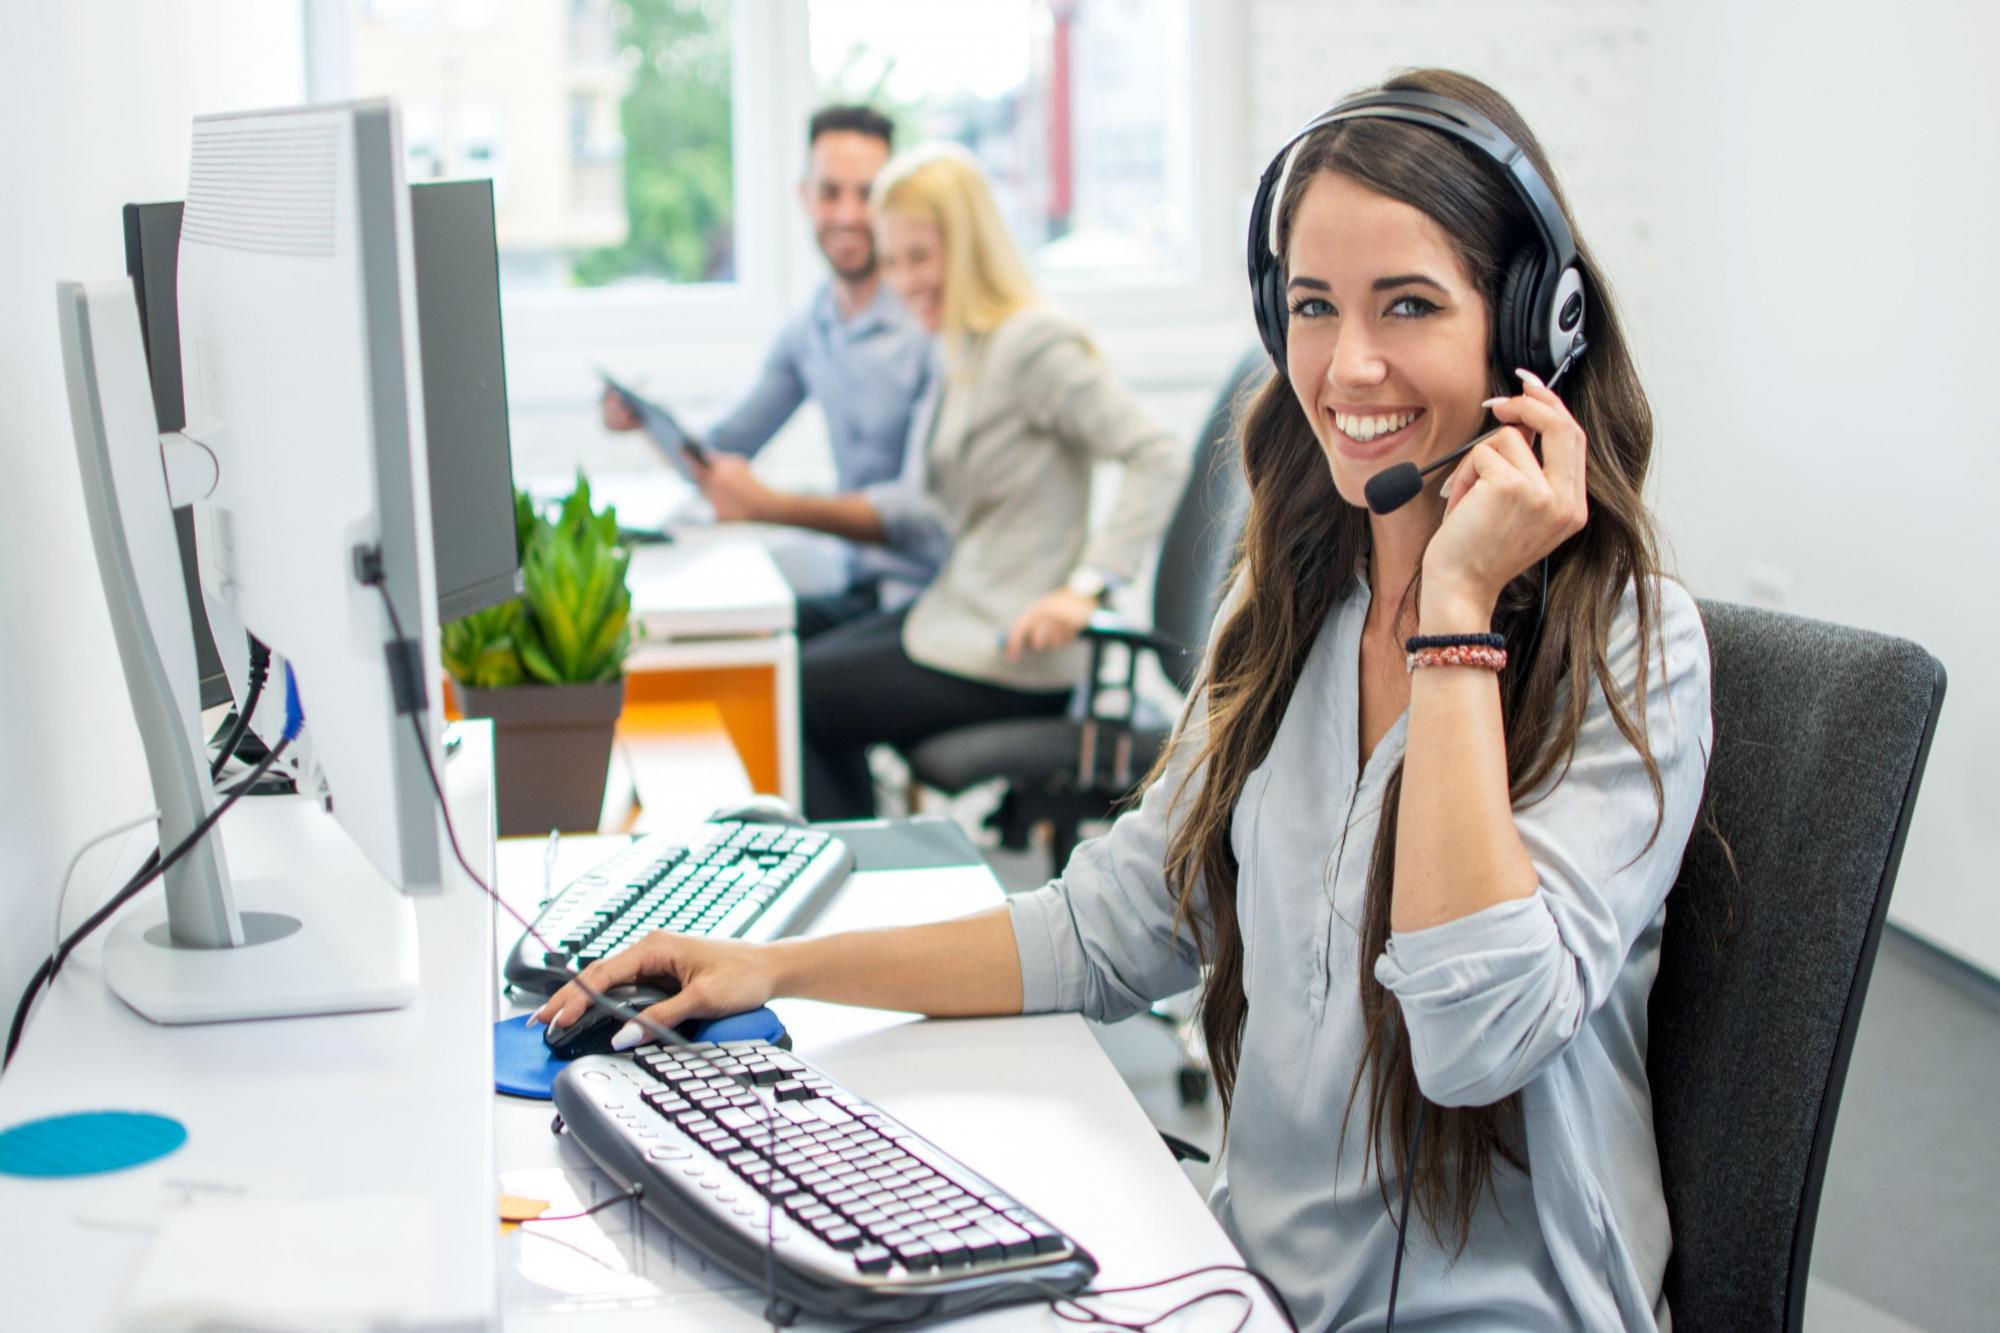 smiling-girl-taking-customer-service-calls-in-front-of-a-computer